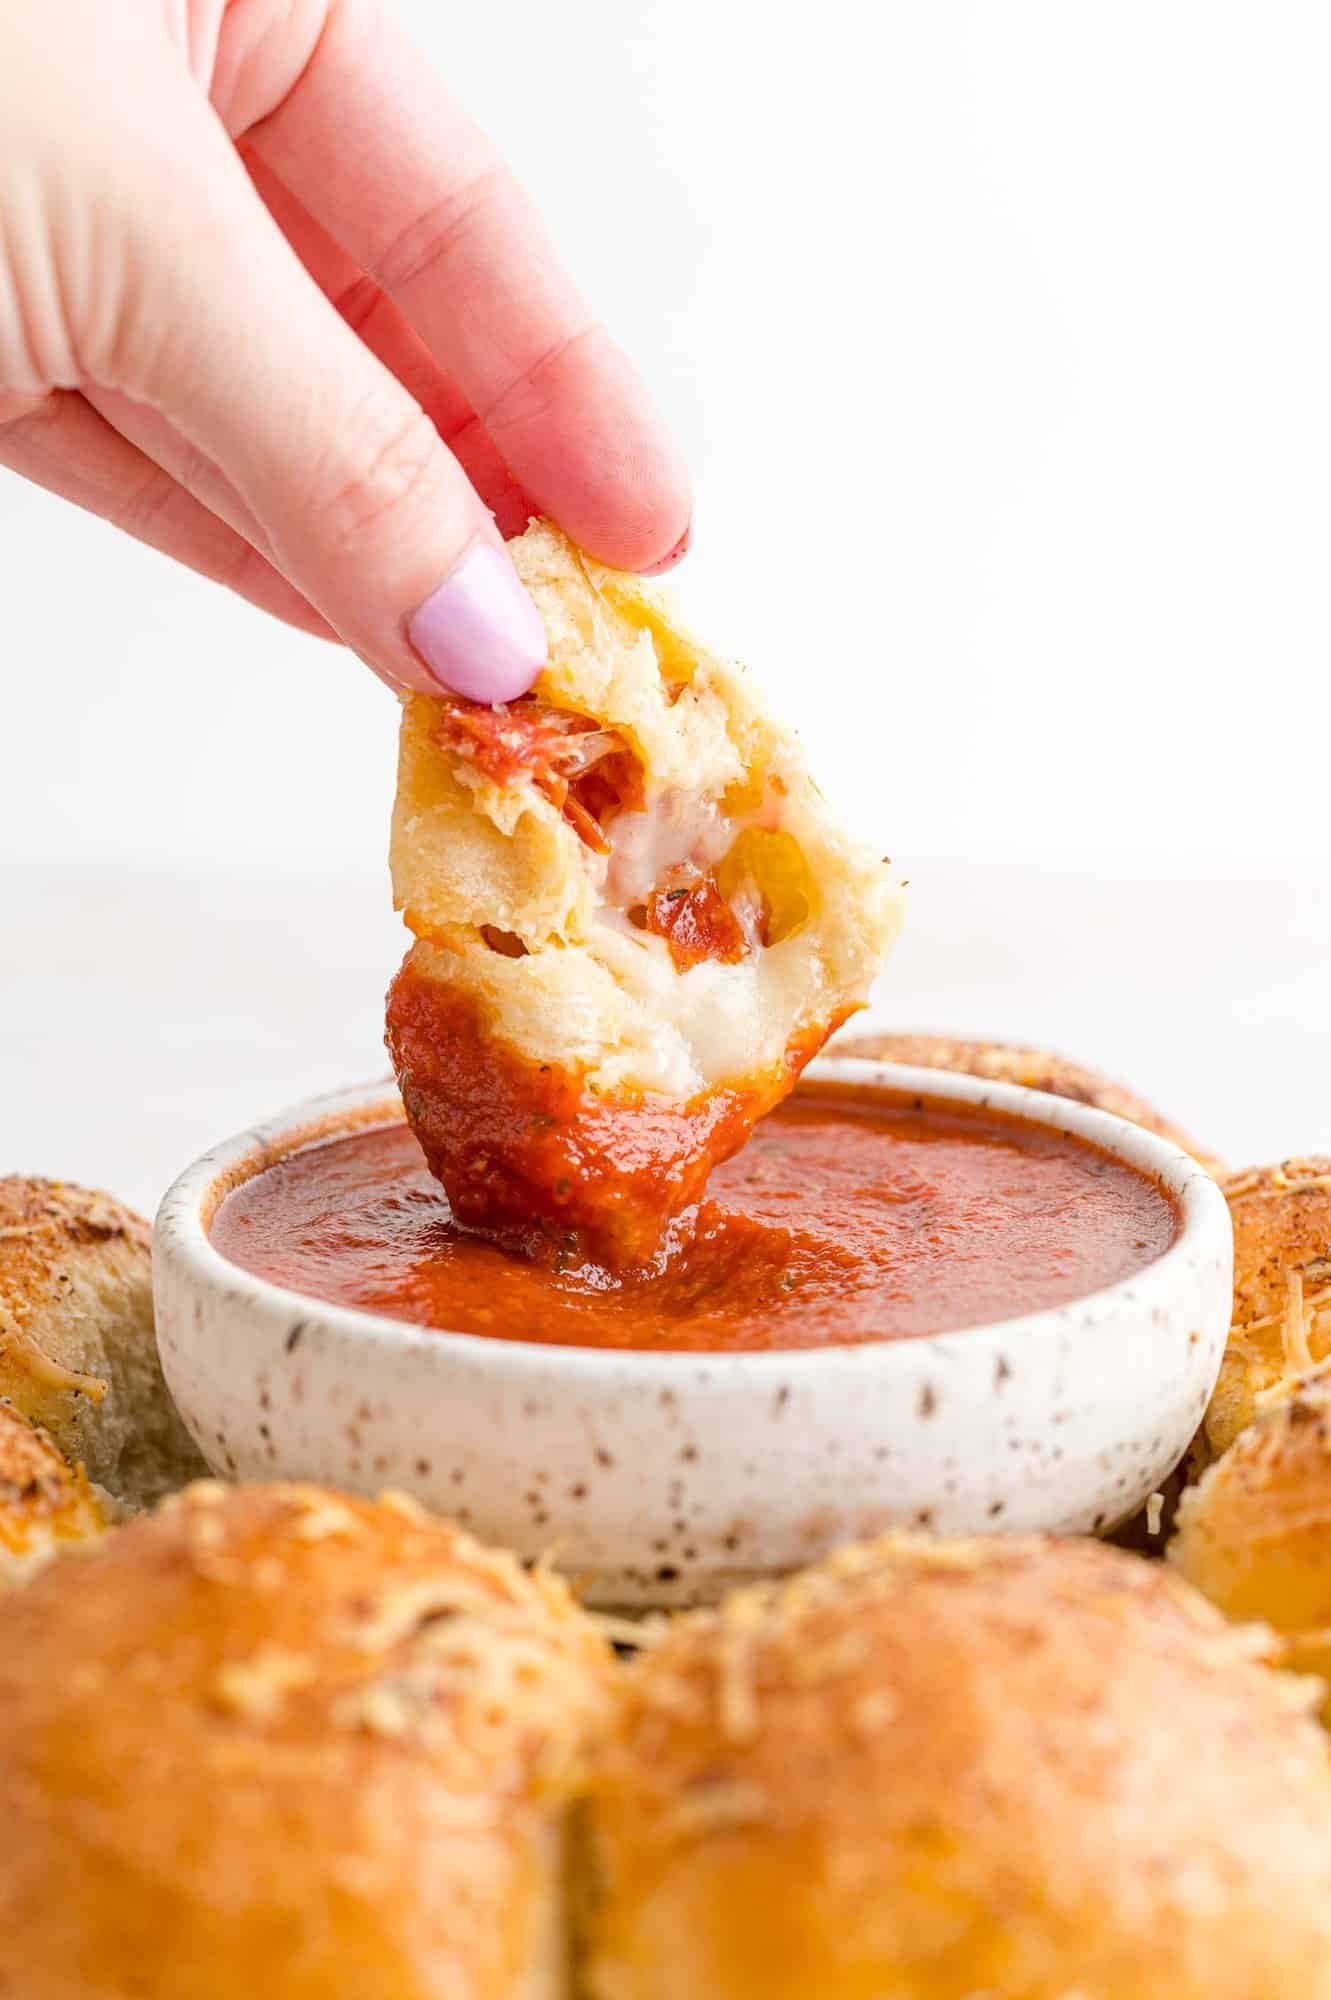 Pizza bite being dipped into sauce.